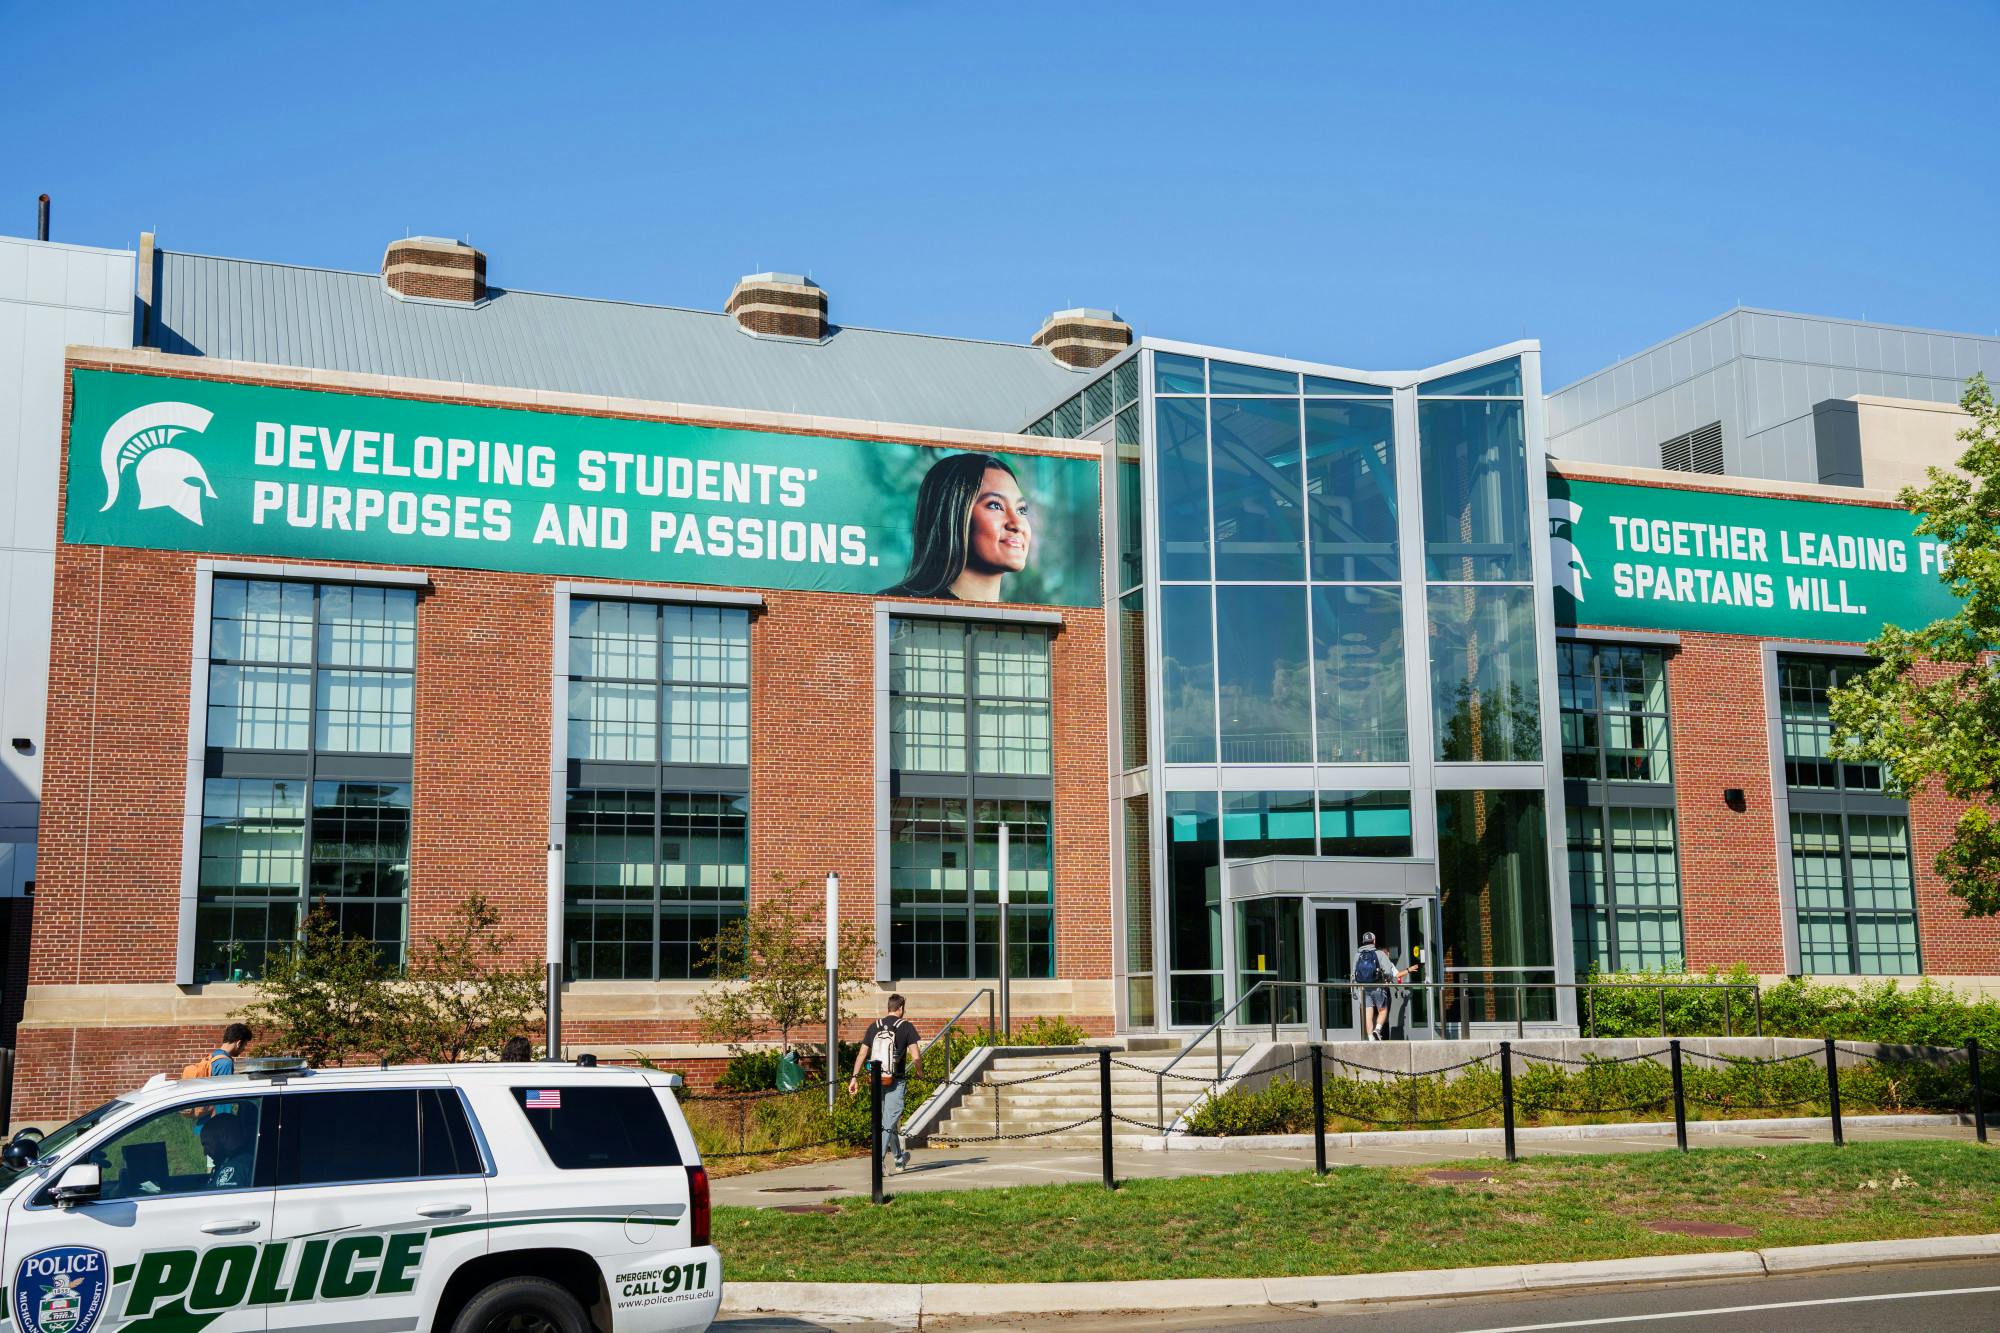 The front entrance to the Michigan State University STEM Teaching and Learning Facility, photographed on Sept. 21, 2022.